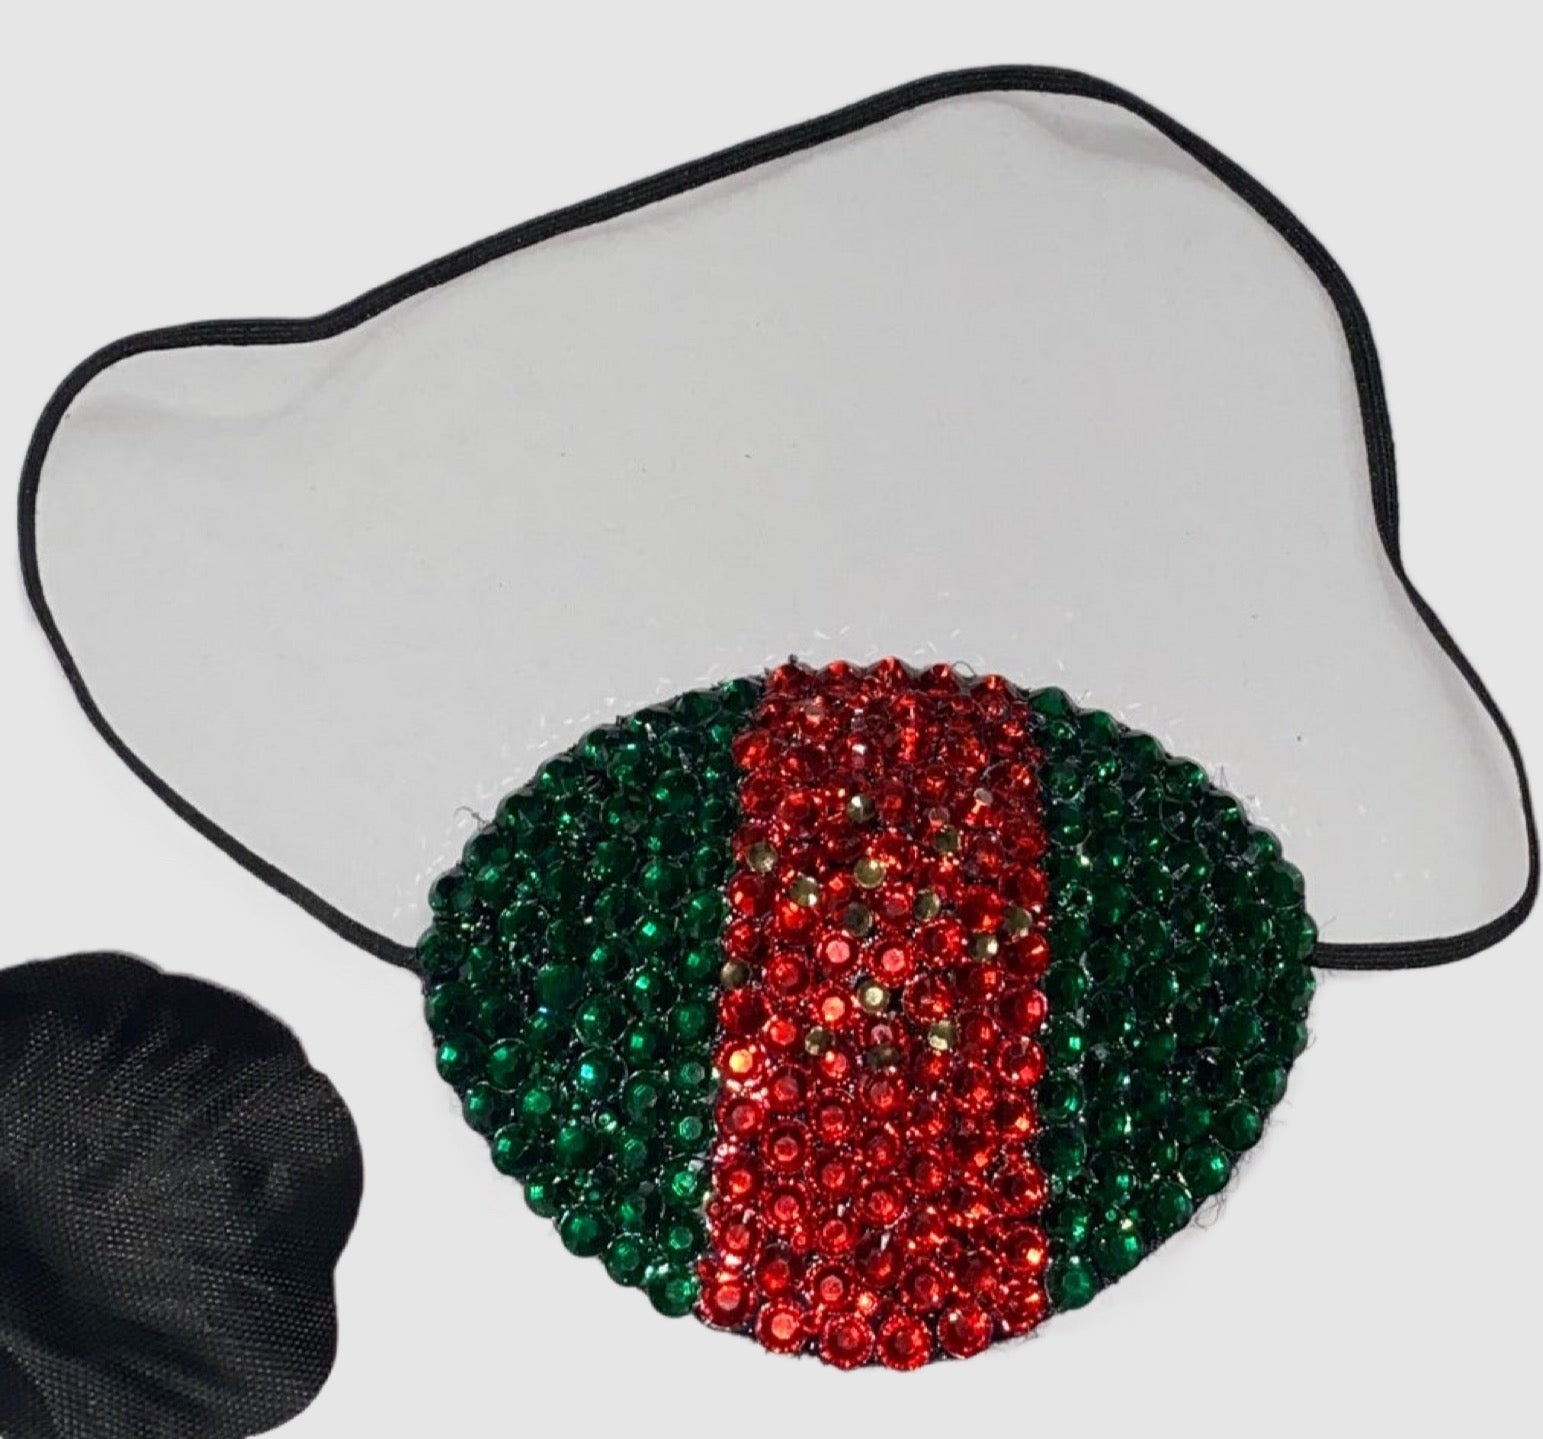 Black Eye Patch Bedazzled In Green Red & Gold Crystals